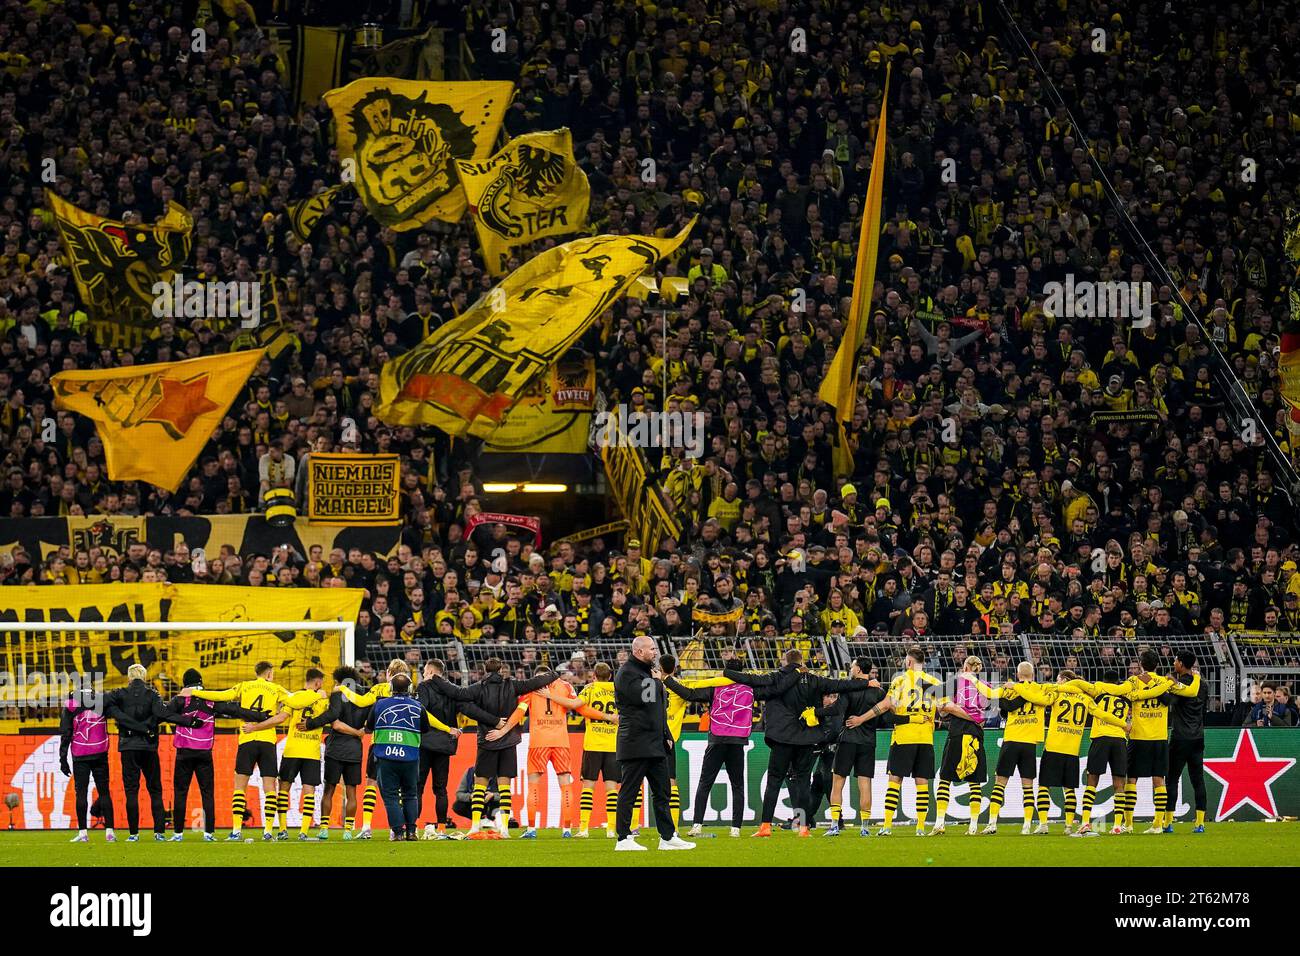 DORTMUND, GERMANY - NOVEMBER 7: Nico Schlotterbeck of Borussia Dortmund, Ramy Bensebaini of Borussia Dortmund, Karim Adeyemi of Borussia Dortmund, Julian Brandt of Borussia Dortmund, Niclas Fullkrug of Borussia Dortmund, Gregor Kobel of Borussia Dortmund, Julian Ryerson of Borussia Dortmund, Felix Nmecha of Borussia Dortmund, Niklas Sule of Borussia Dortmund, Marco Reus of Borussia Dortmund, Marcel Sabitzer of Borussia Dortmund, Youssoufa Moukoko of Borussia Dortmund, Mats Hummels of Borussia Dortmund thank their fans for their support after the UEFA Champions League Group F match between Boru Stock Photo